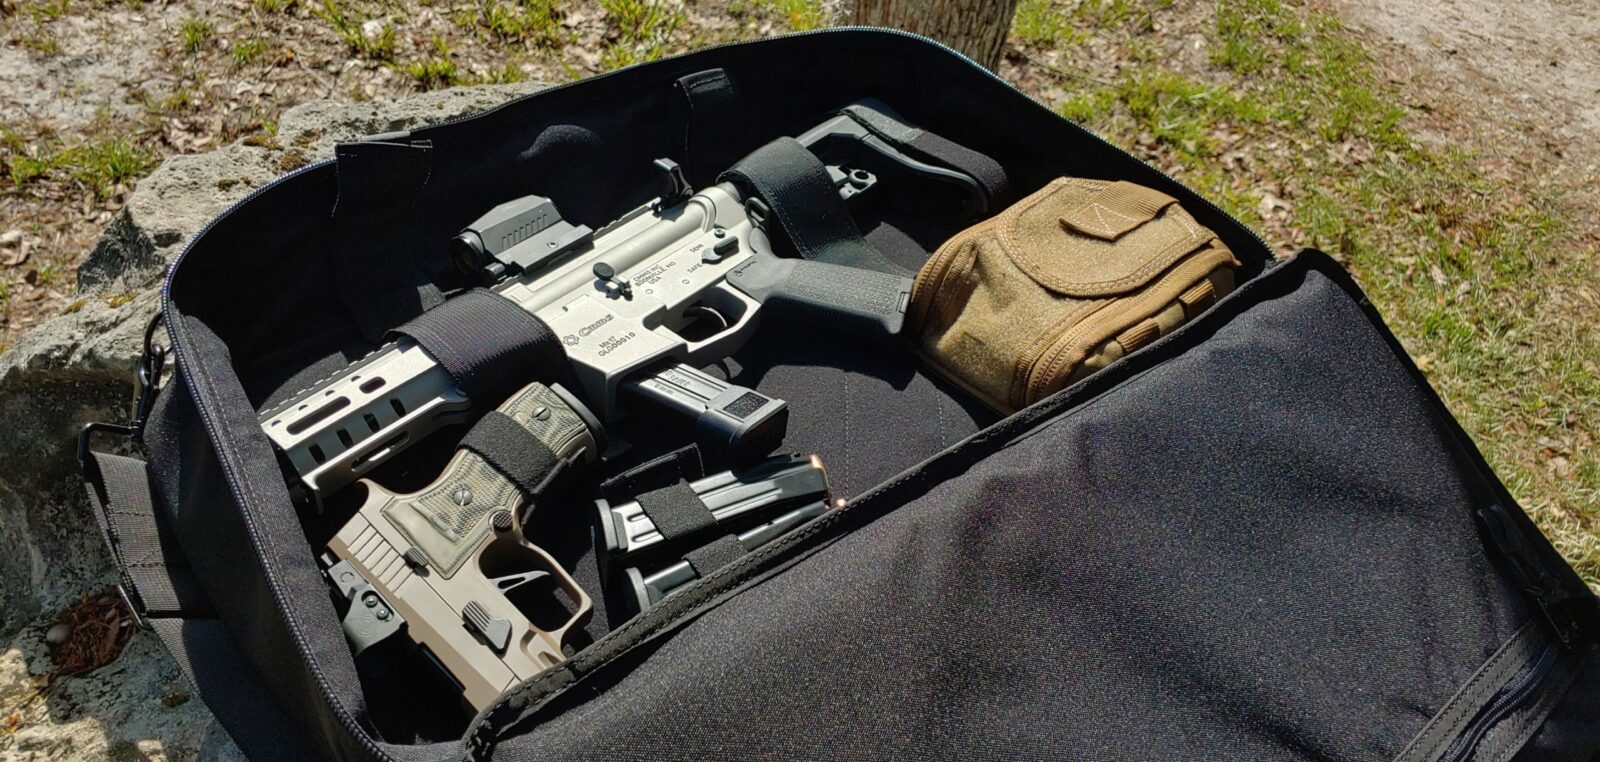 The Tactical Combat Things That Dont Suck The Lynx Defense Byte Discreet Case